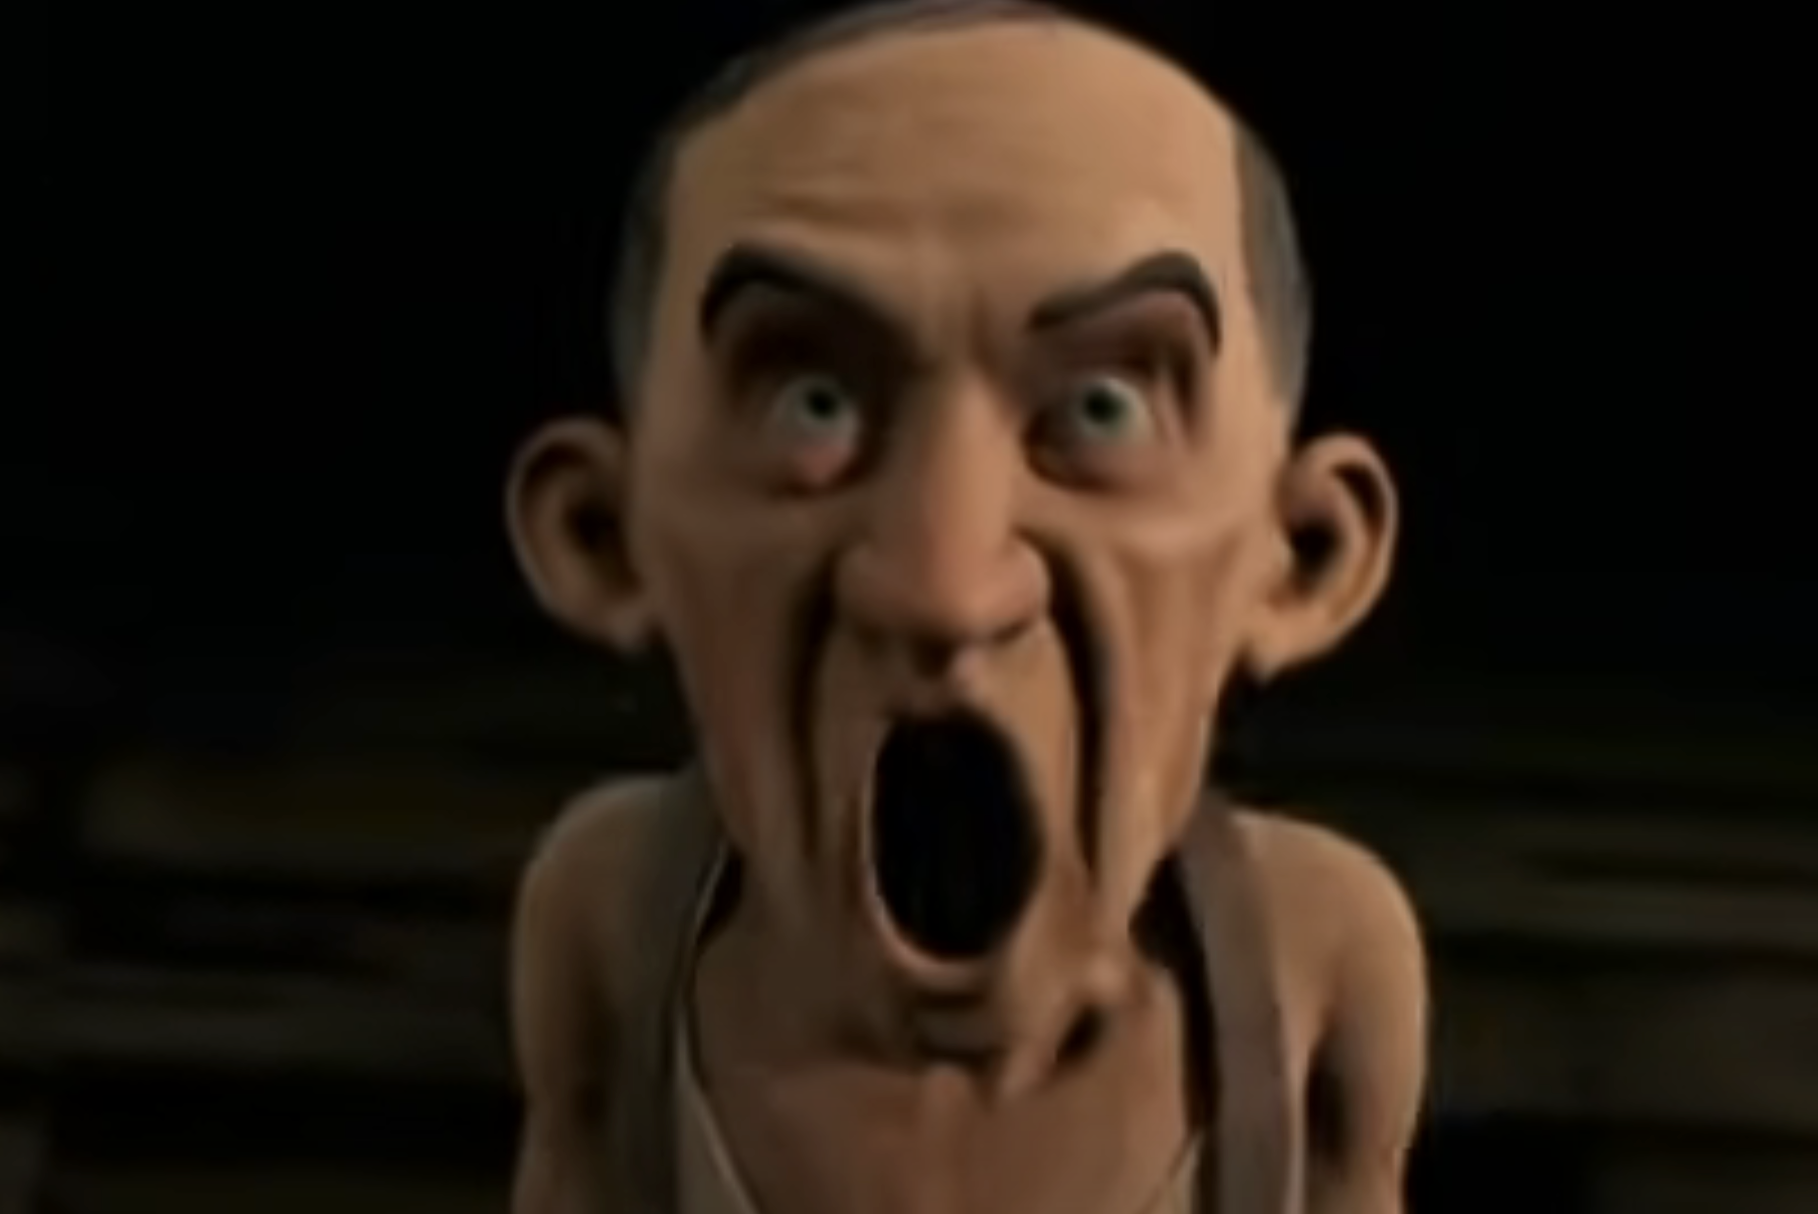 Animated character with an exaggerated surprised expression